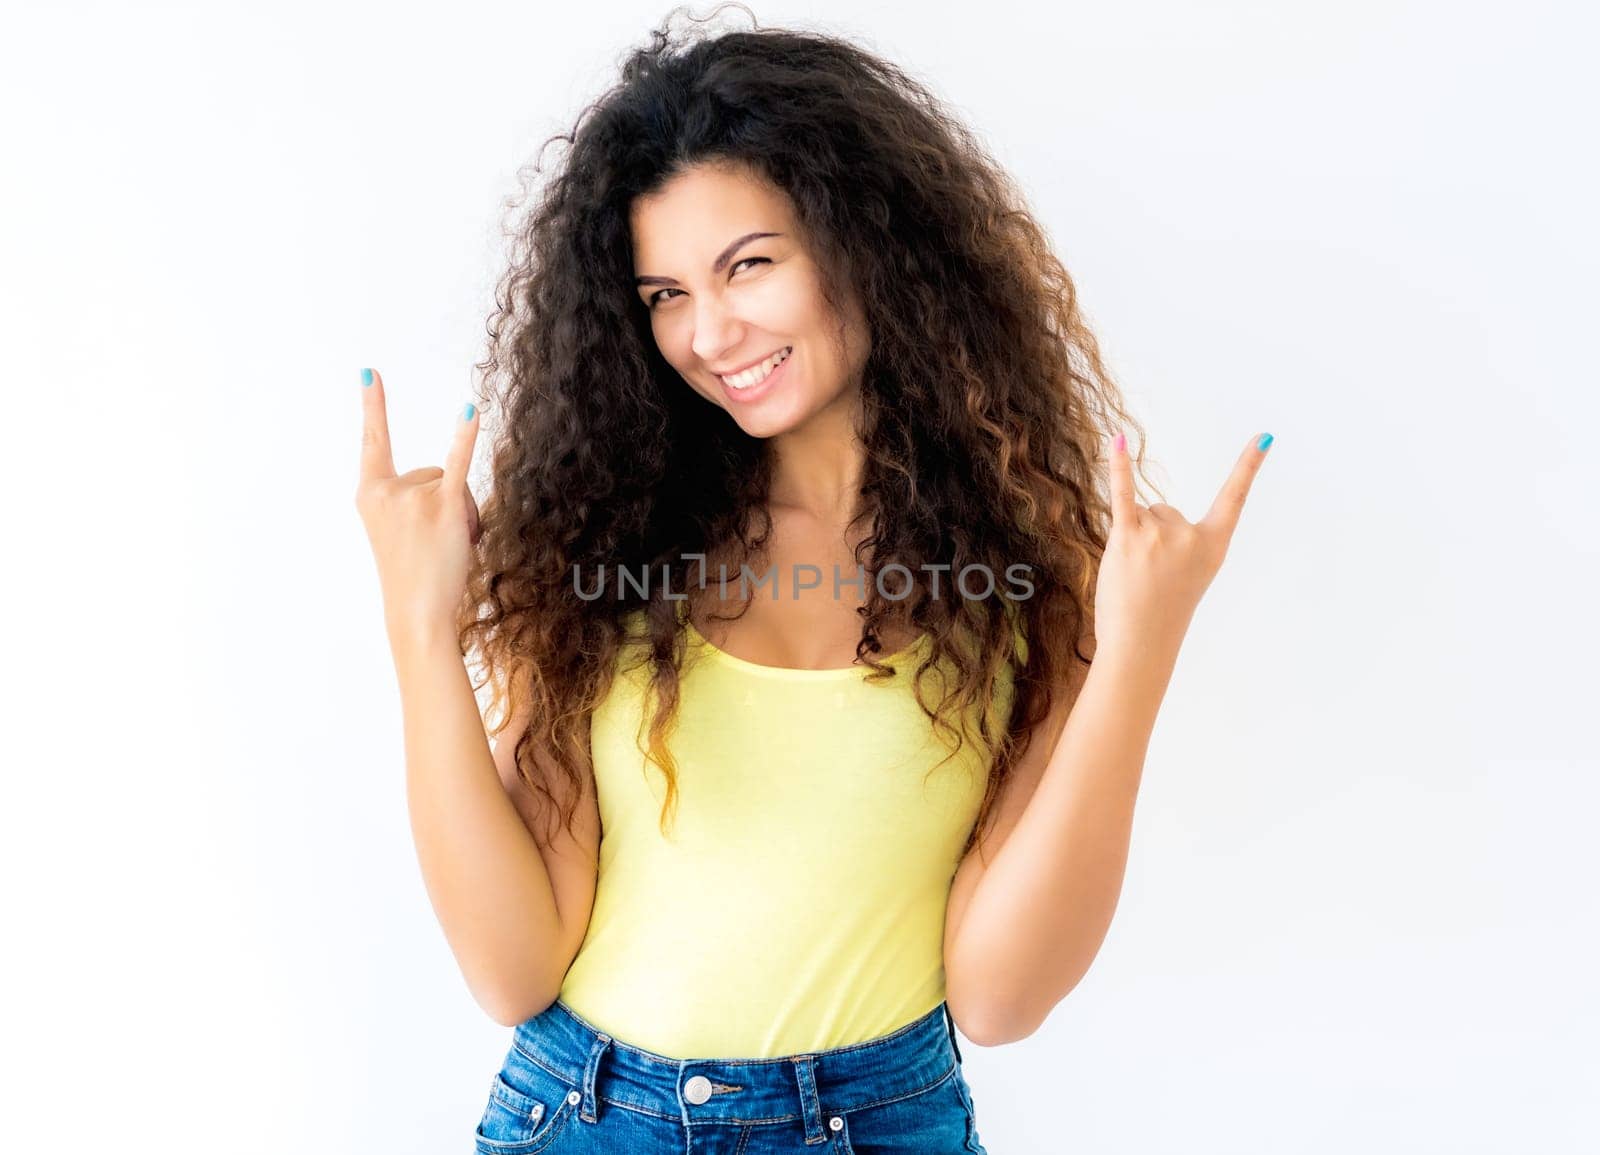 Attractive young girl showing devil horns gesture